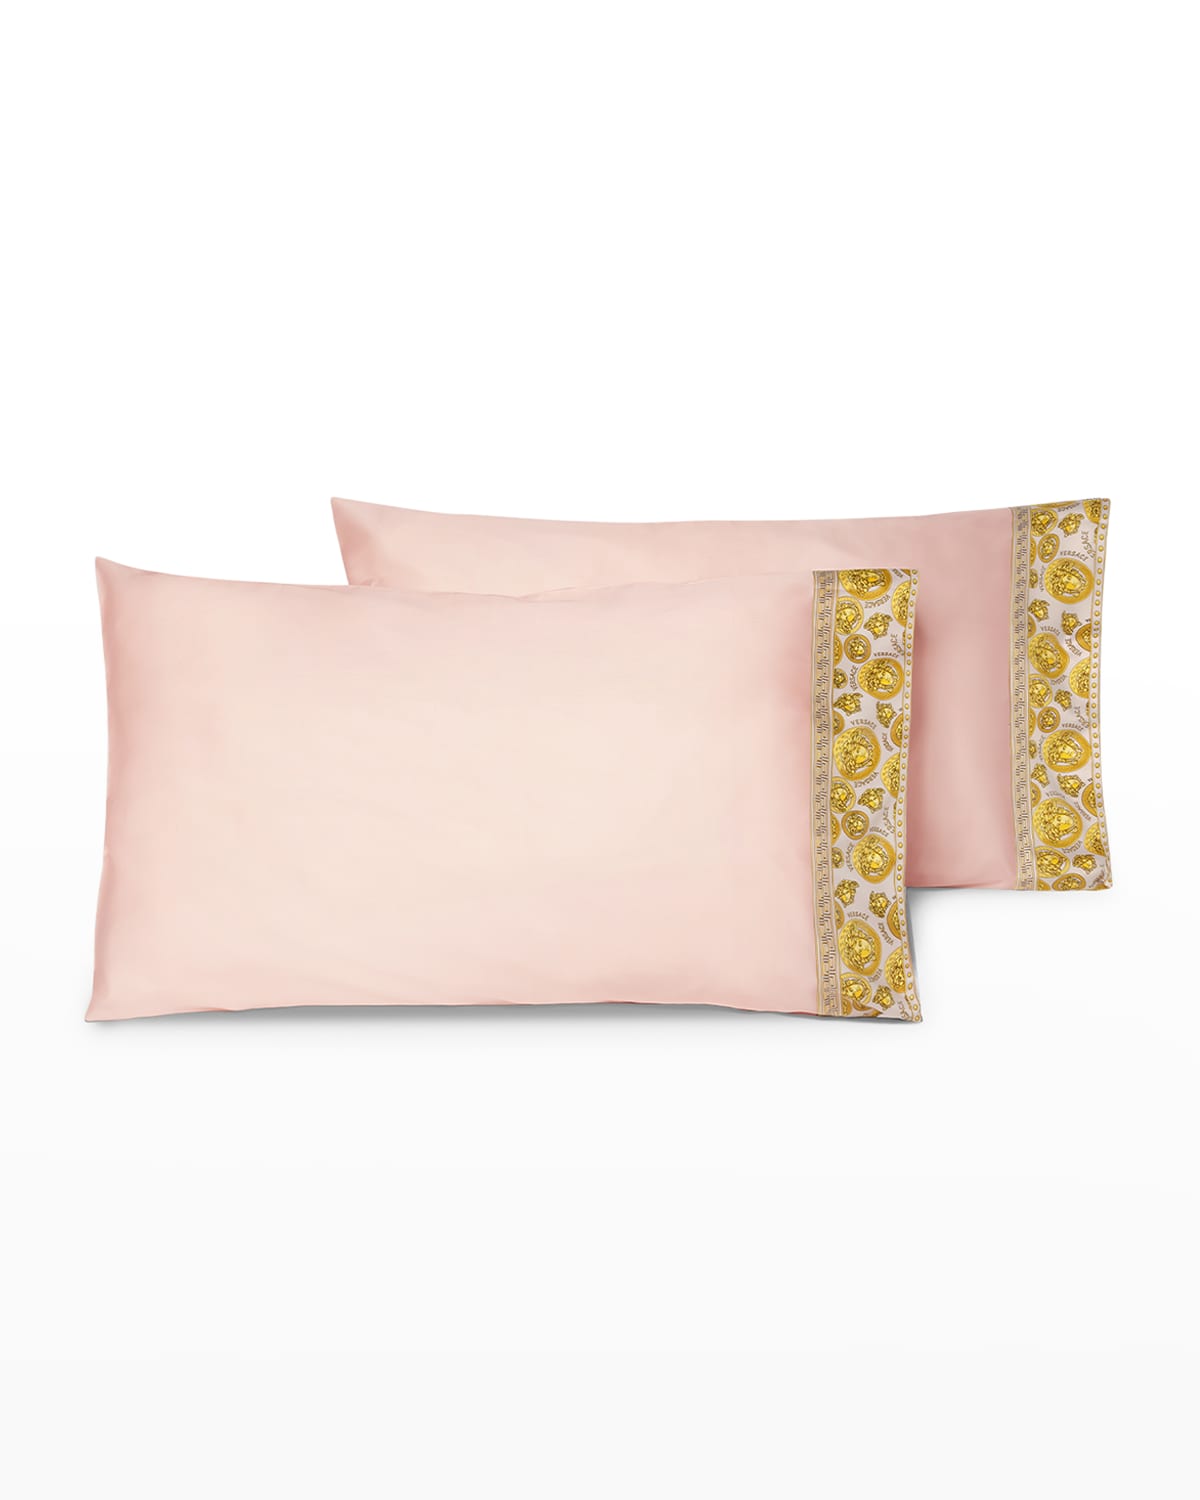 Versace Home Collection Medusa Amplified King Pillowcases, Set Of 2